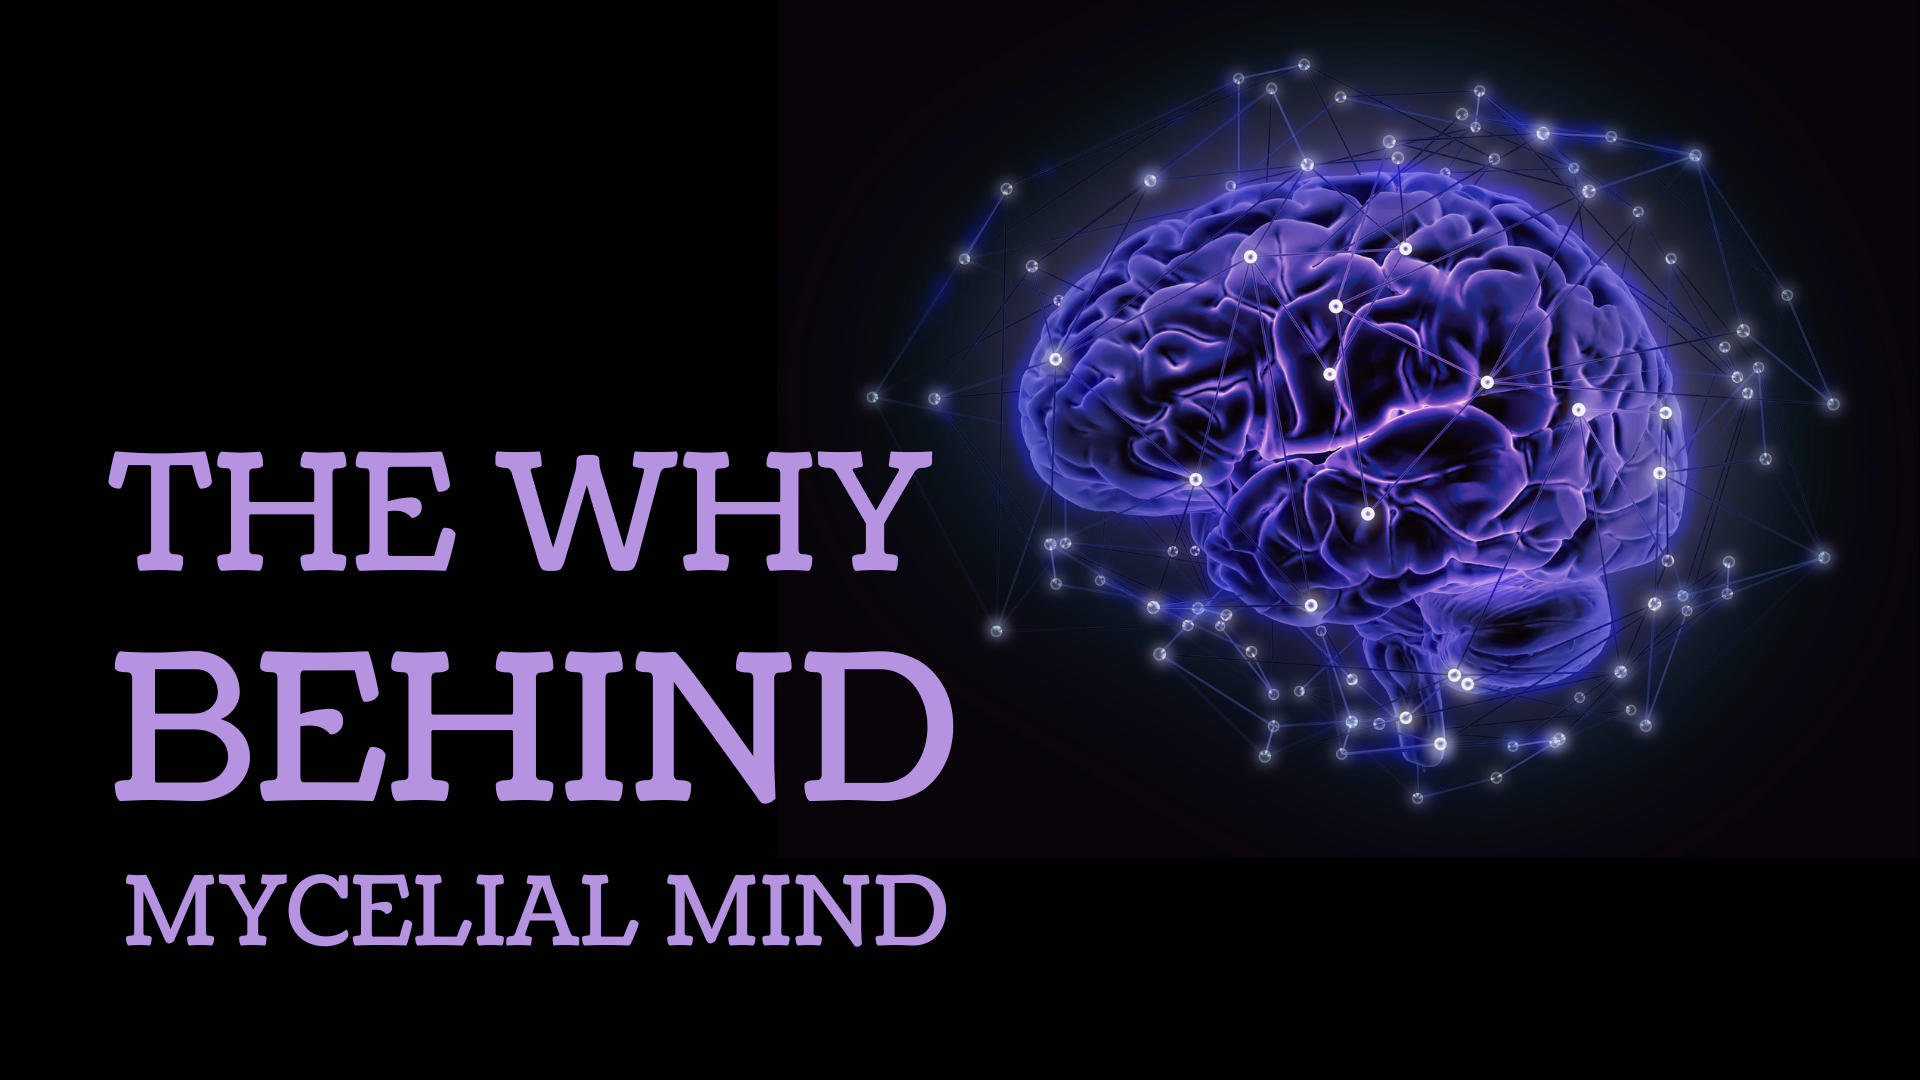 The “Why” Behind Mycelial Mind